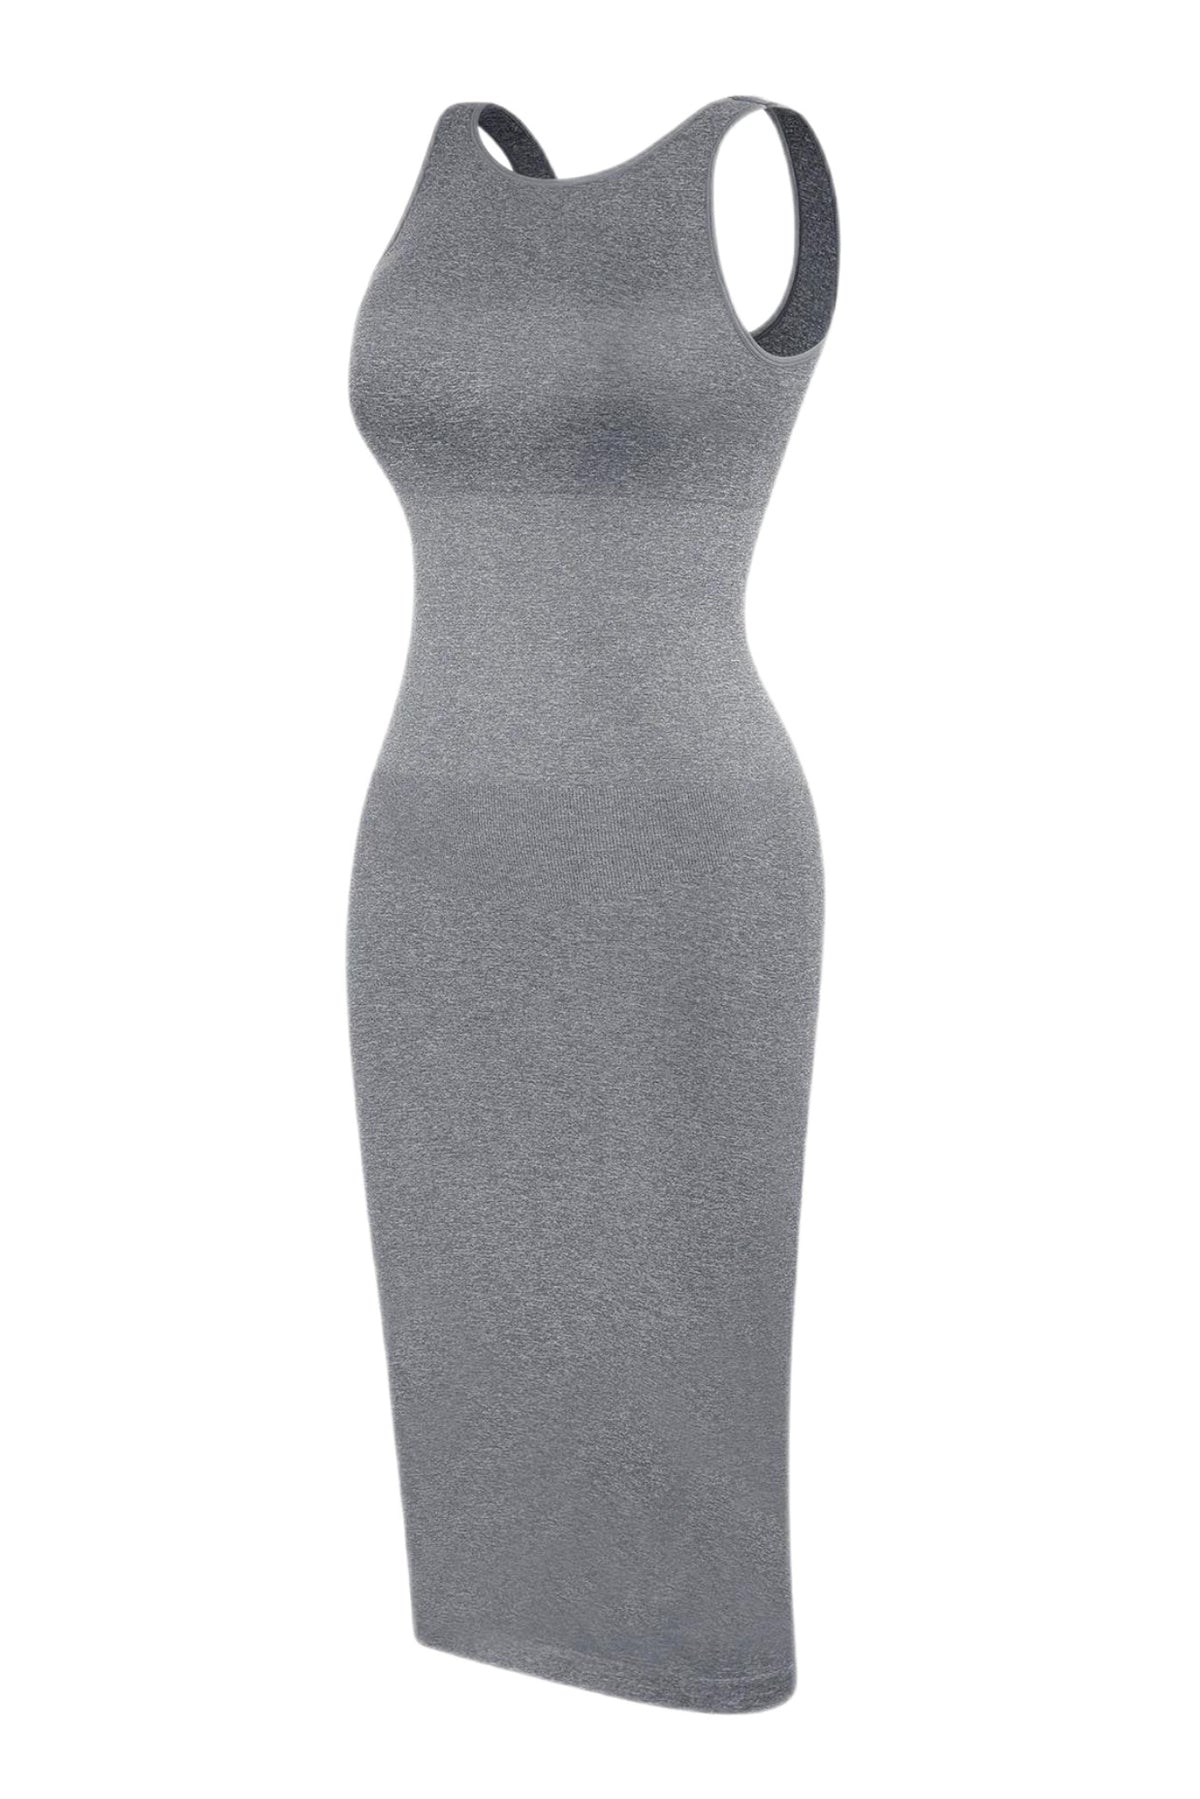 Reign Shaping Dress - Heather Grey Eco Contour Clothing